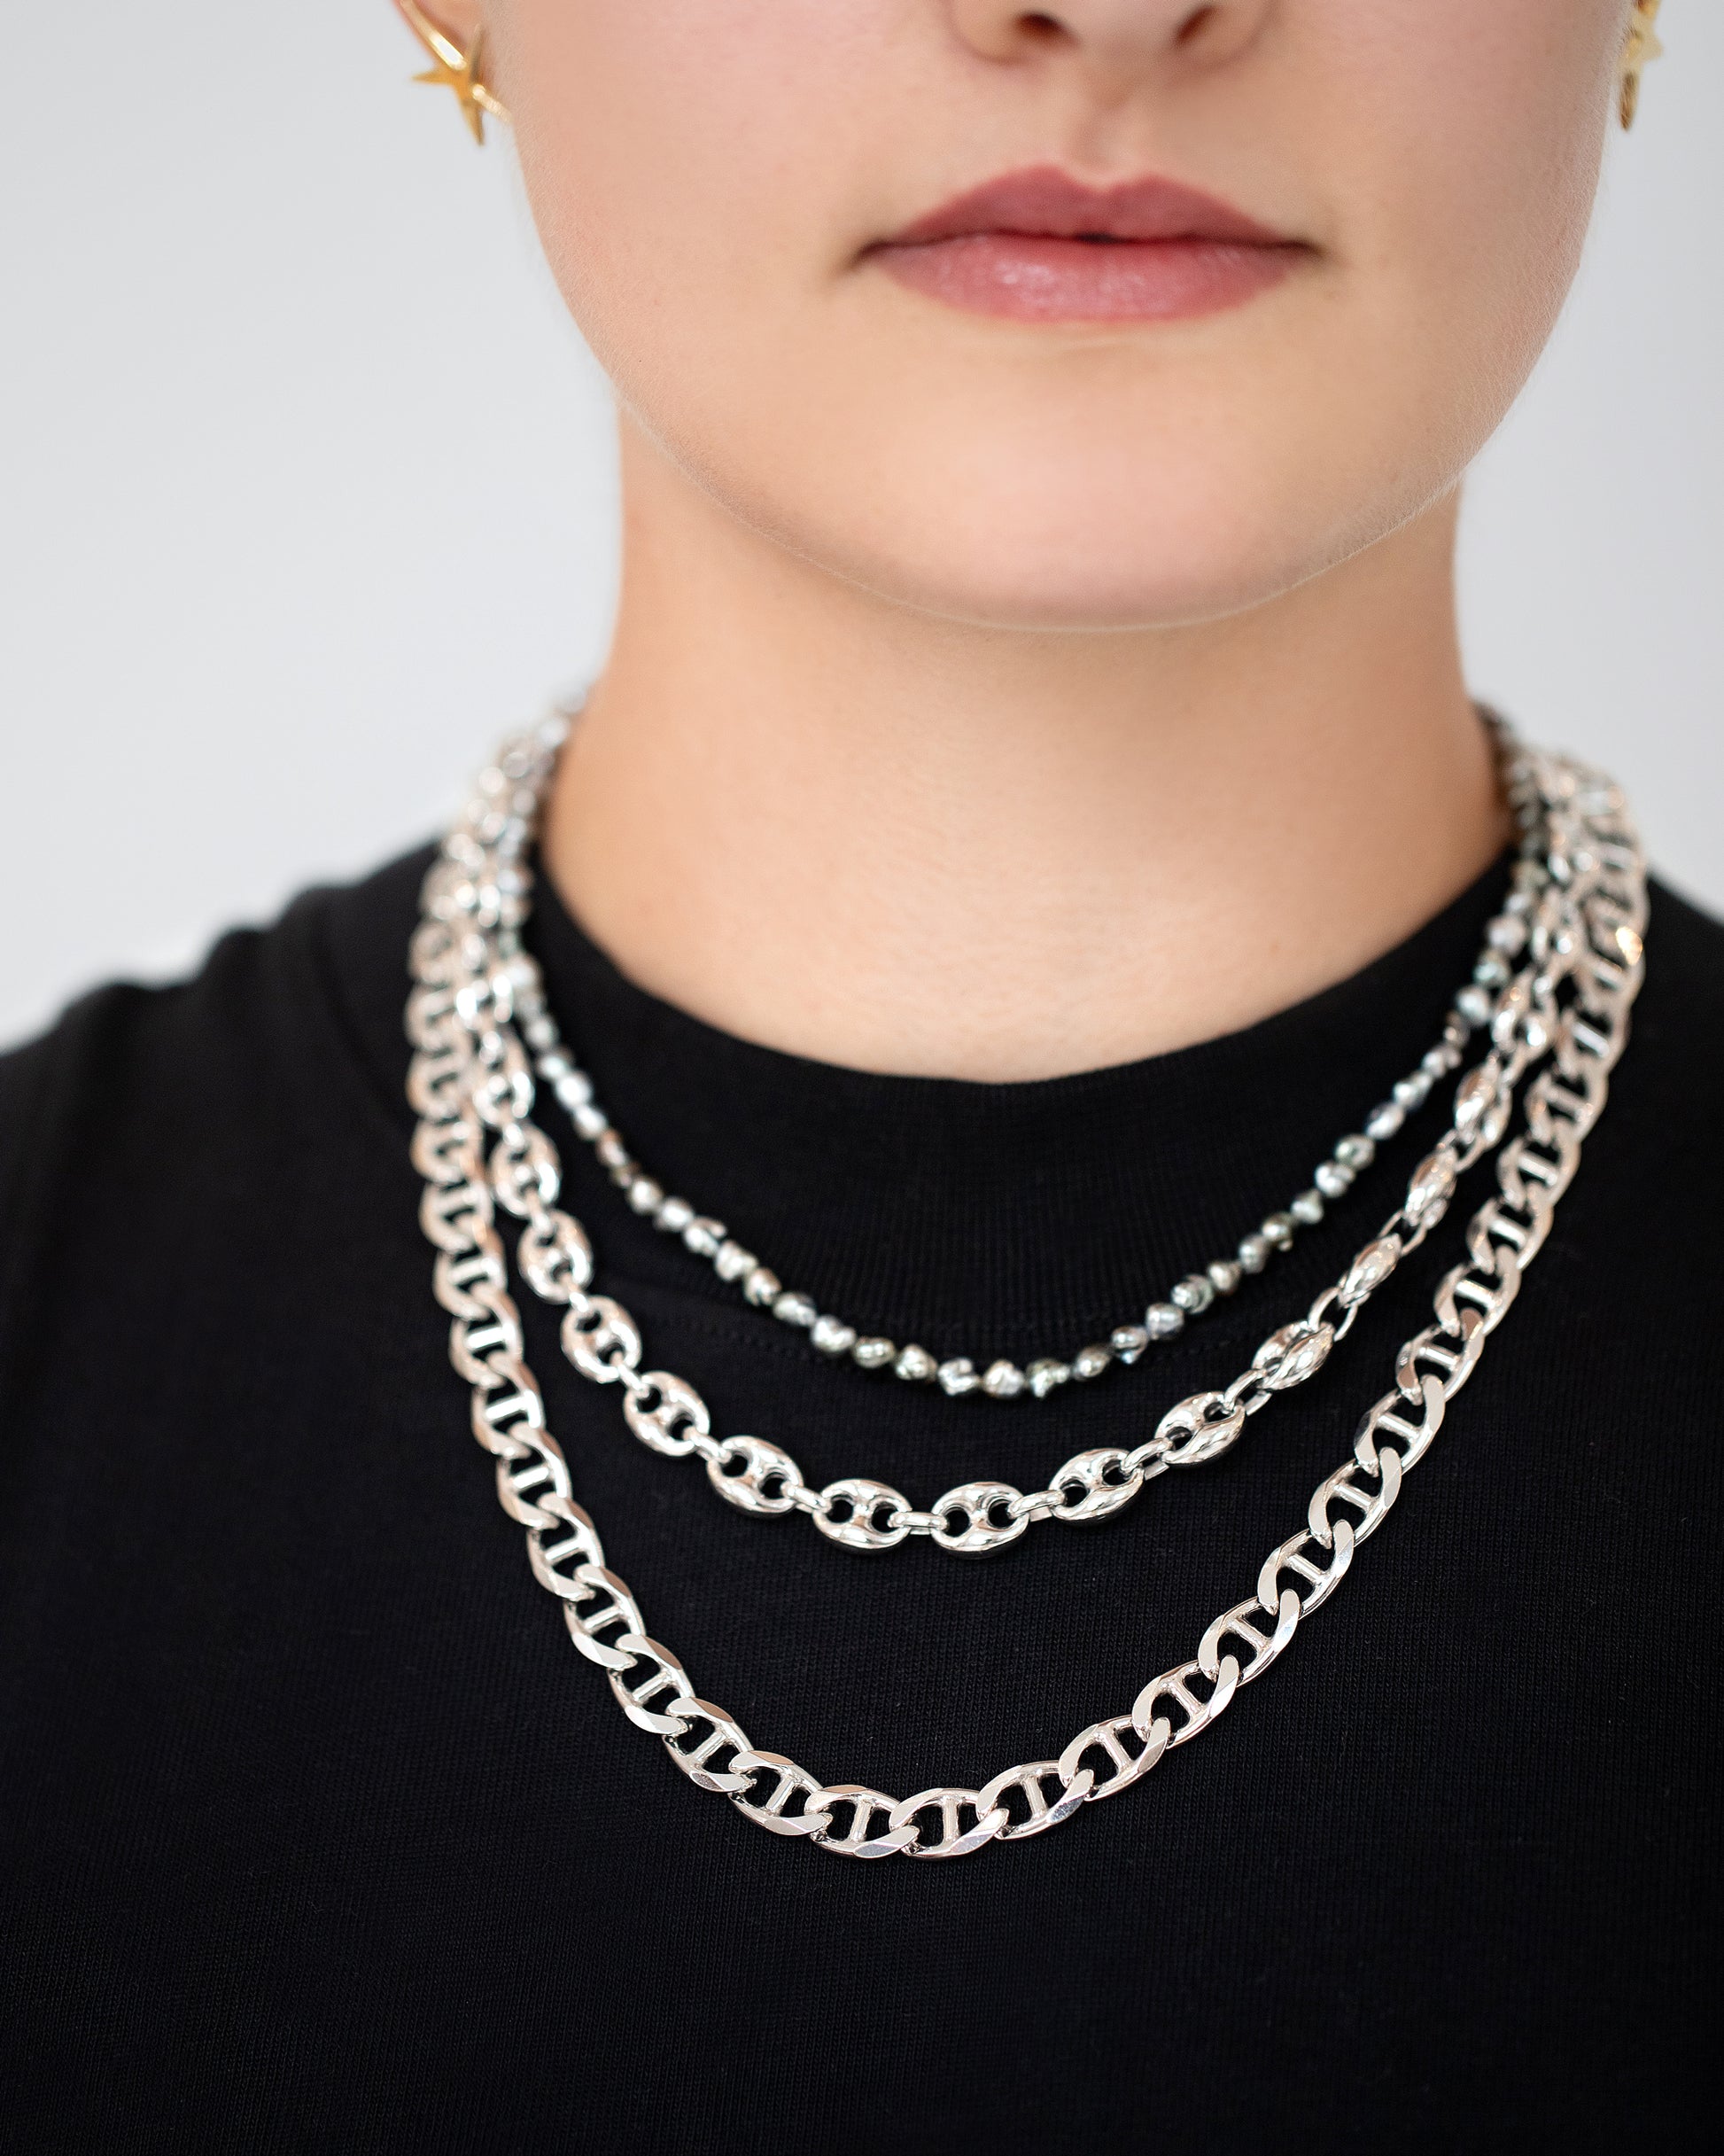 Silver Puffed Mariner Chain on model.